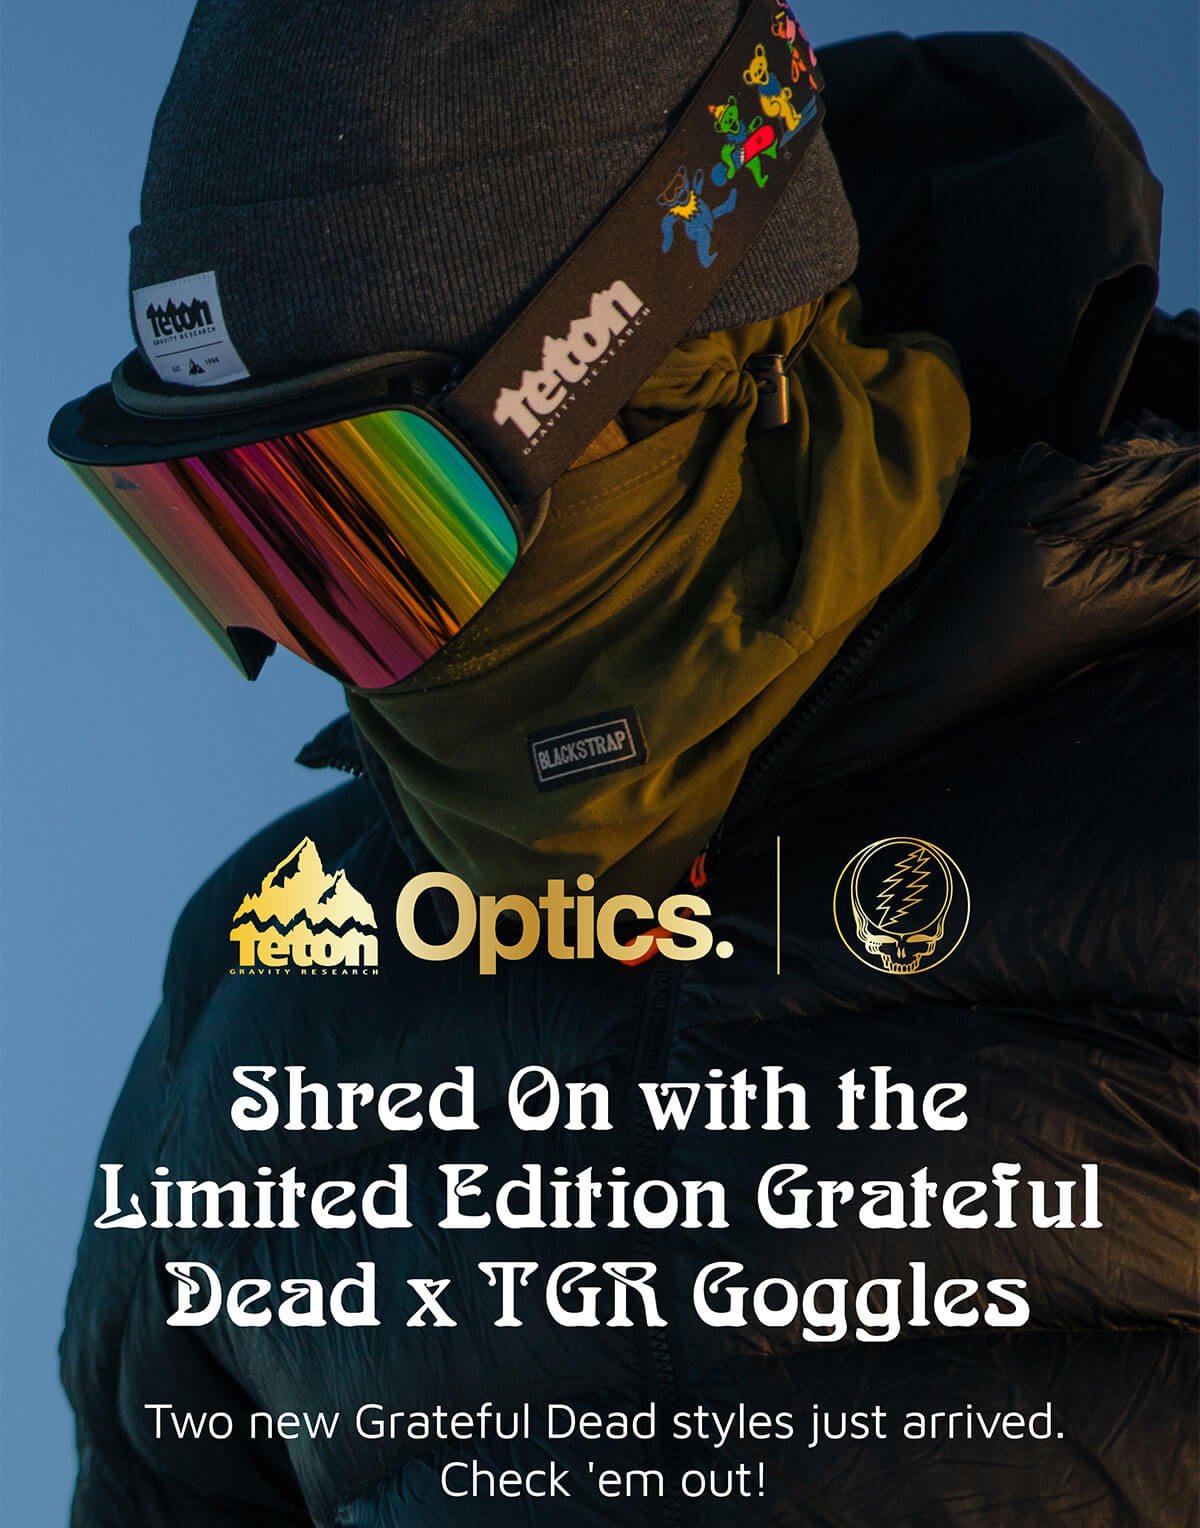 Shred On with the Limited Edition Grateful Dead x TGR Goggles. Two new Grateful Dead styles just arrived. Check 'em out!